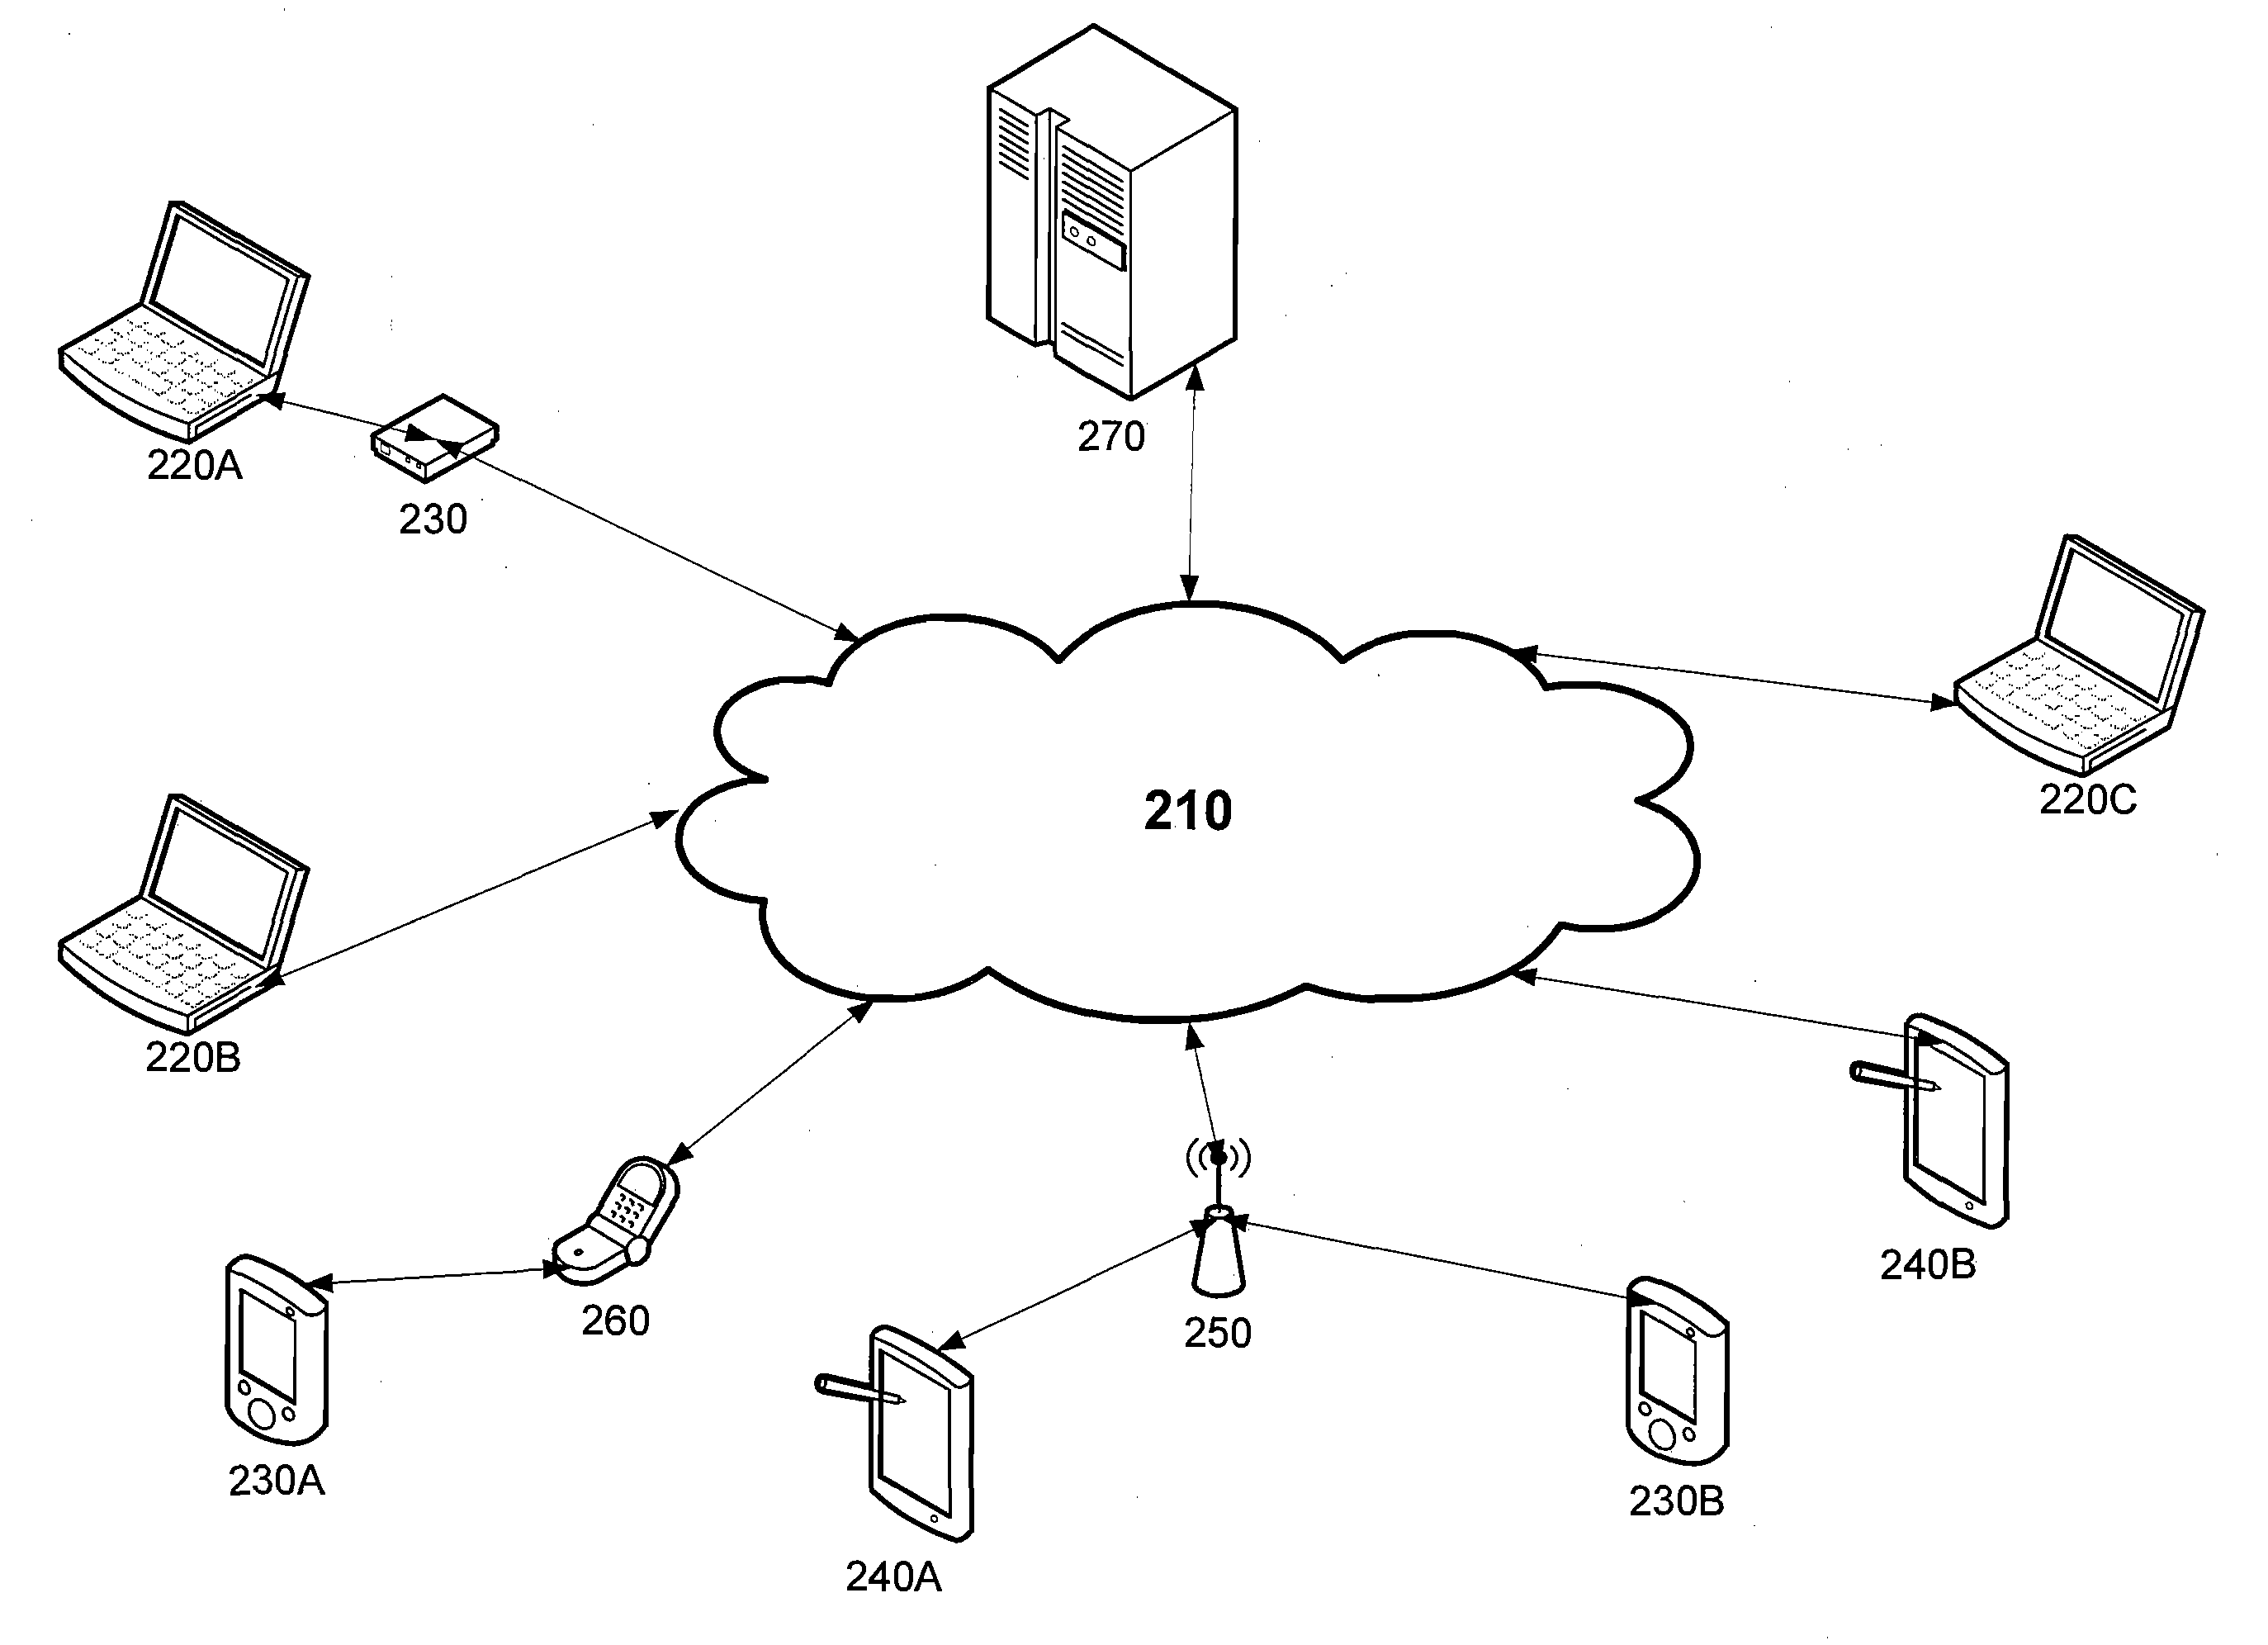 Software, systems, and methodologies for realignment of remote databases by a central database in support field representative territory assignments